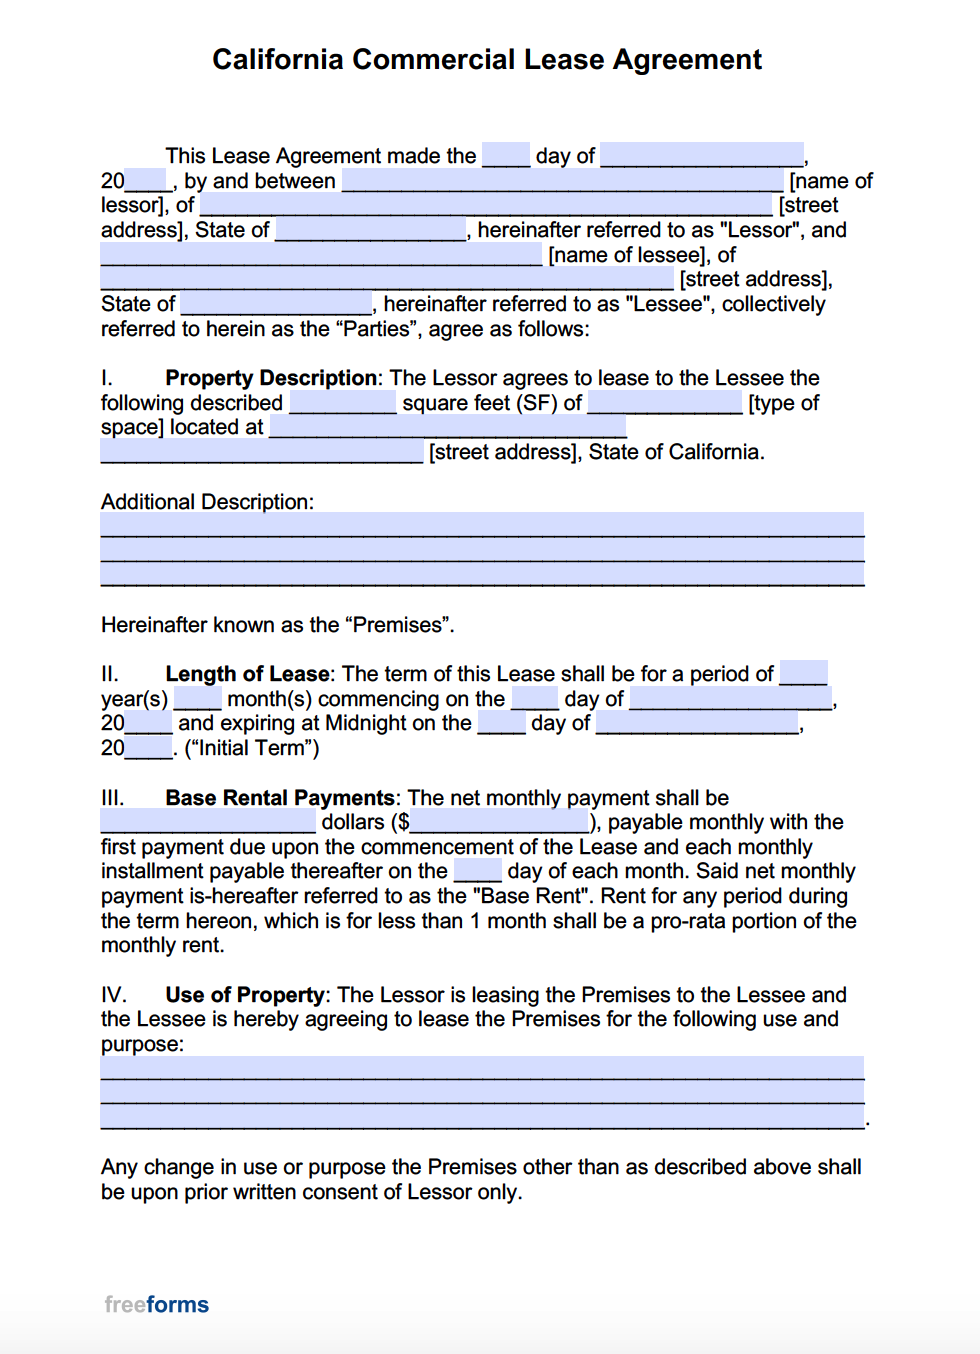 Free California Commercial Lease Agreement Template  PDF  WORD Inside Business Lease Agreement Template